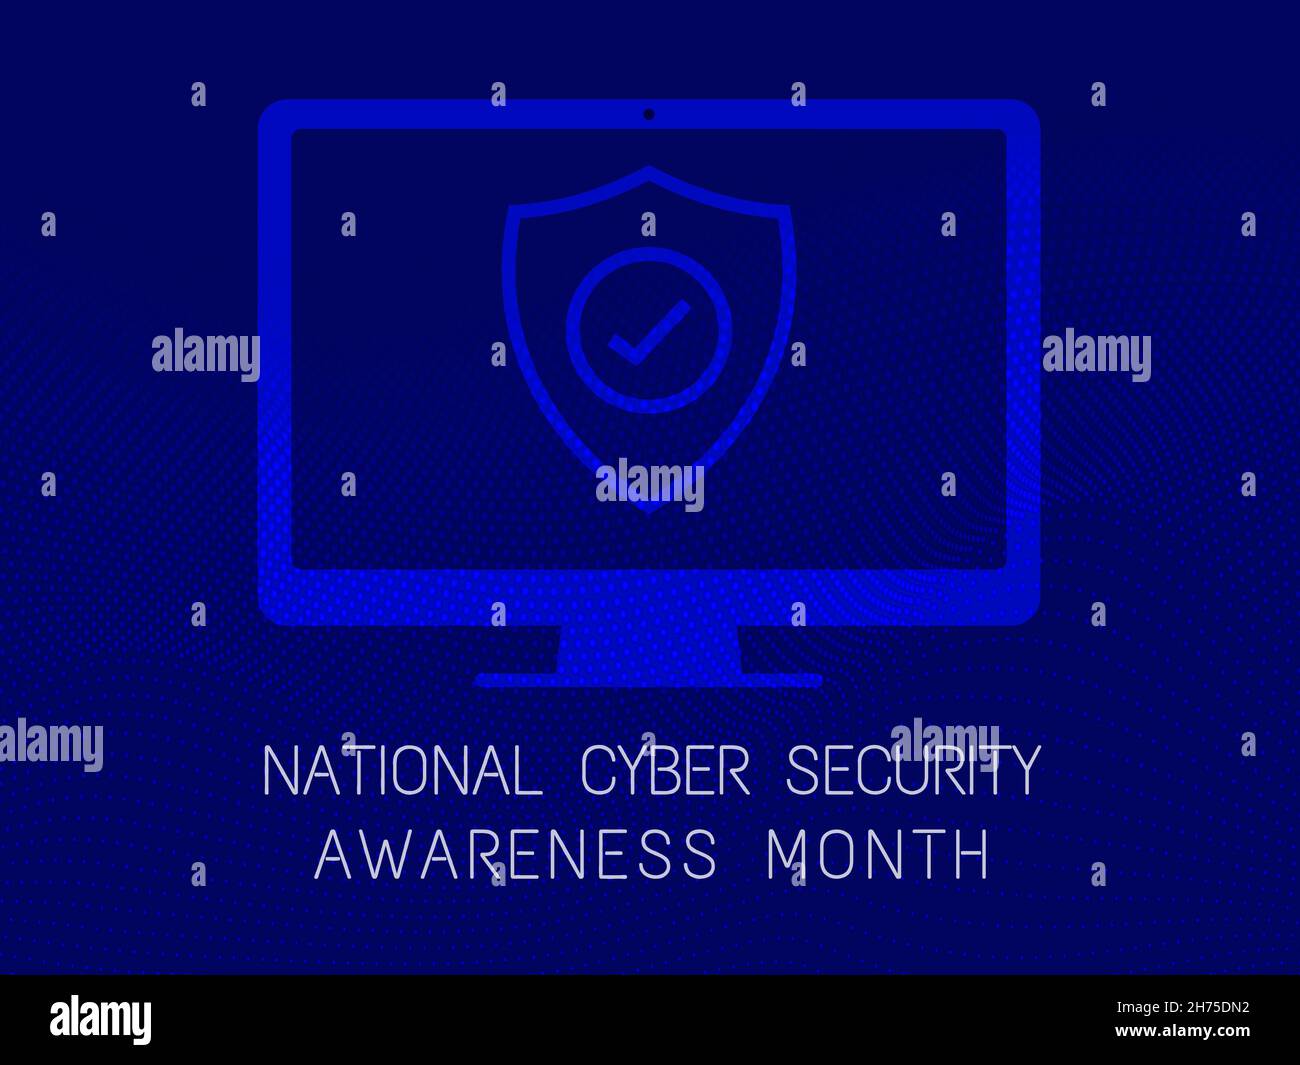 National Cyber Security Awareness Month. Vector stock illustration. Stock Vector